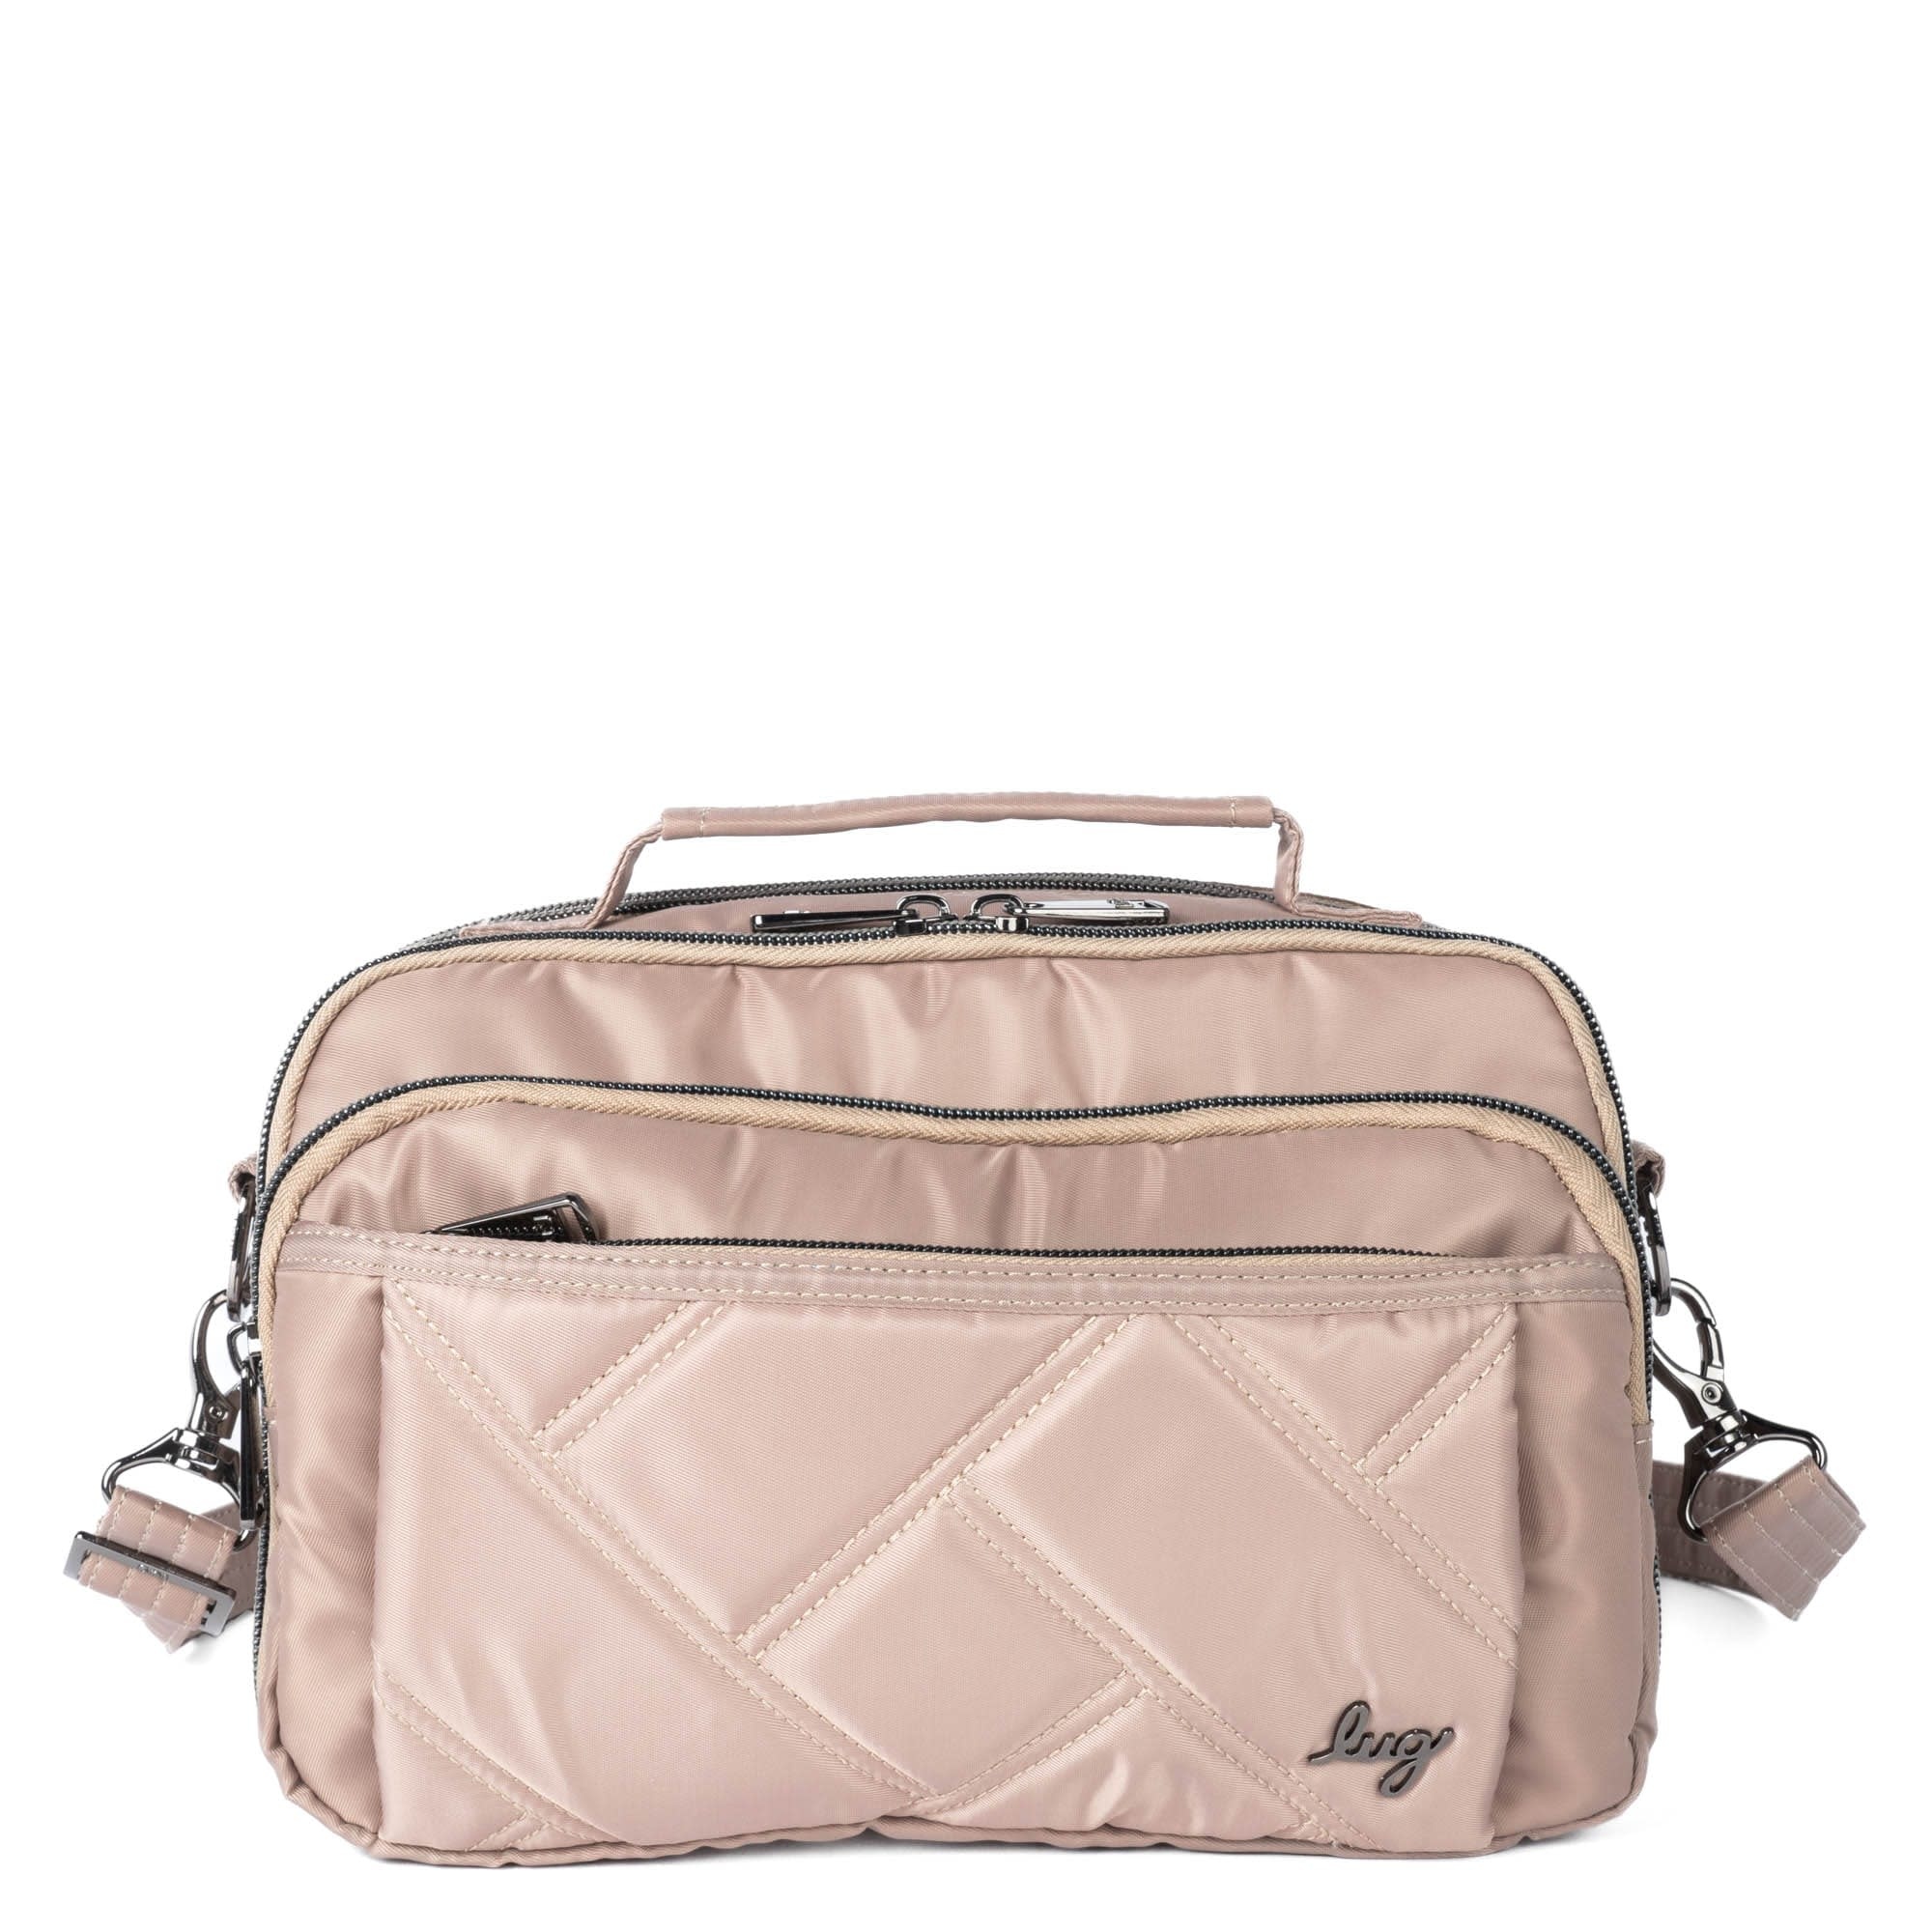 Lug Scoop SE Crossbody Bag - Sand Taupe - Just Bags Luggage Center